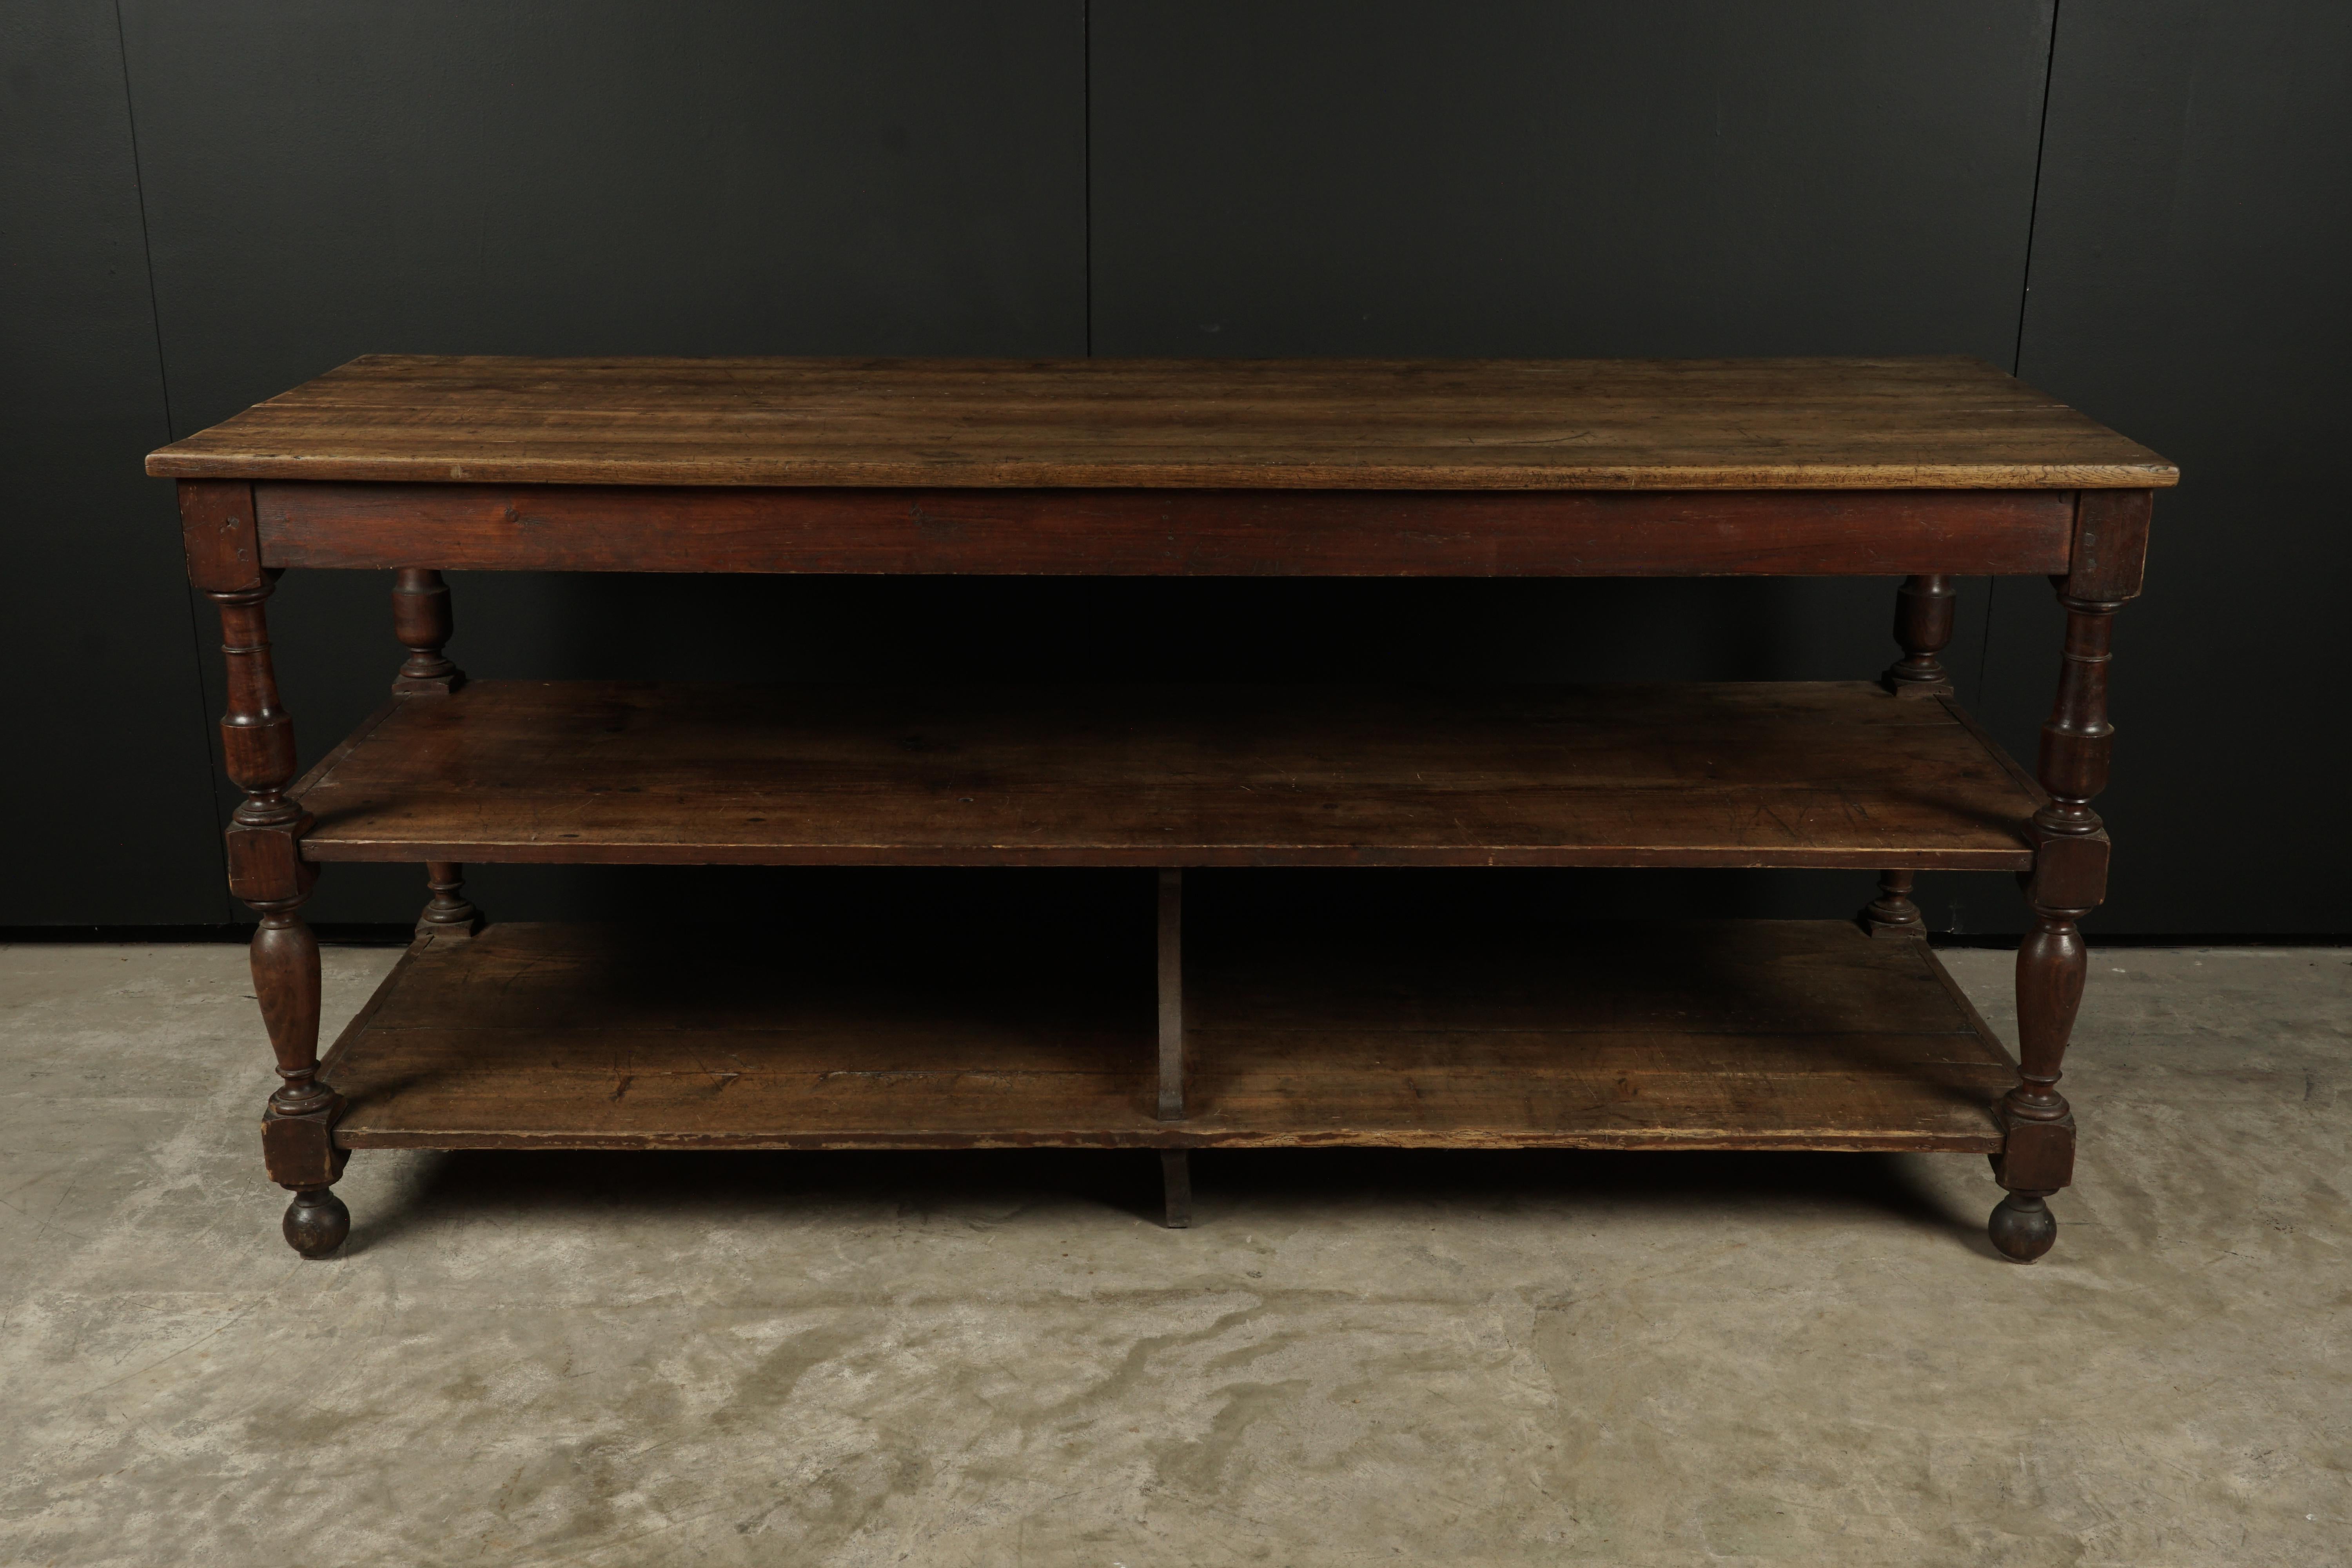 Early draper table from France, circa 1890. Solid pine construction with nice patina and wear. Presumably from a haberdashery.